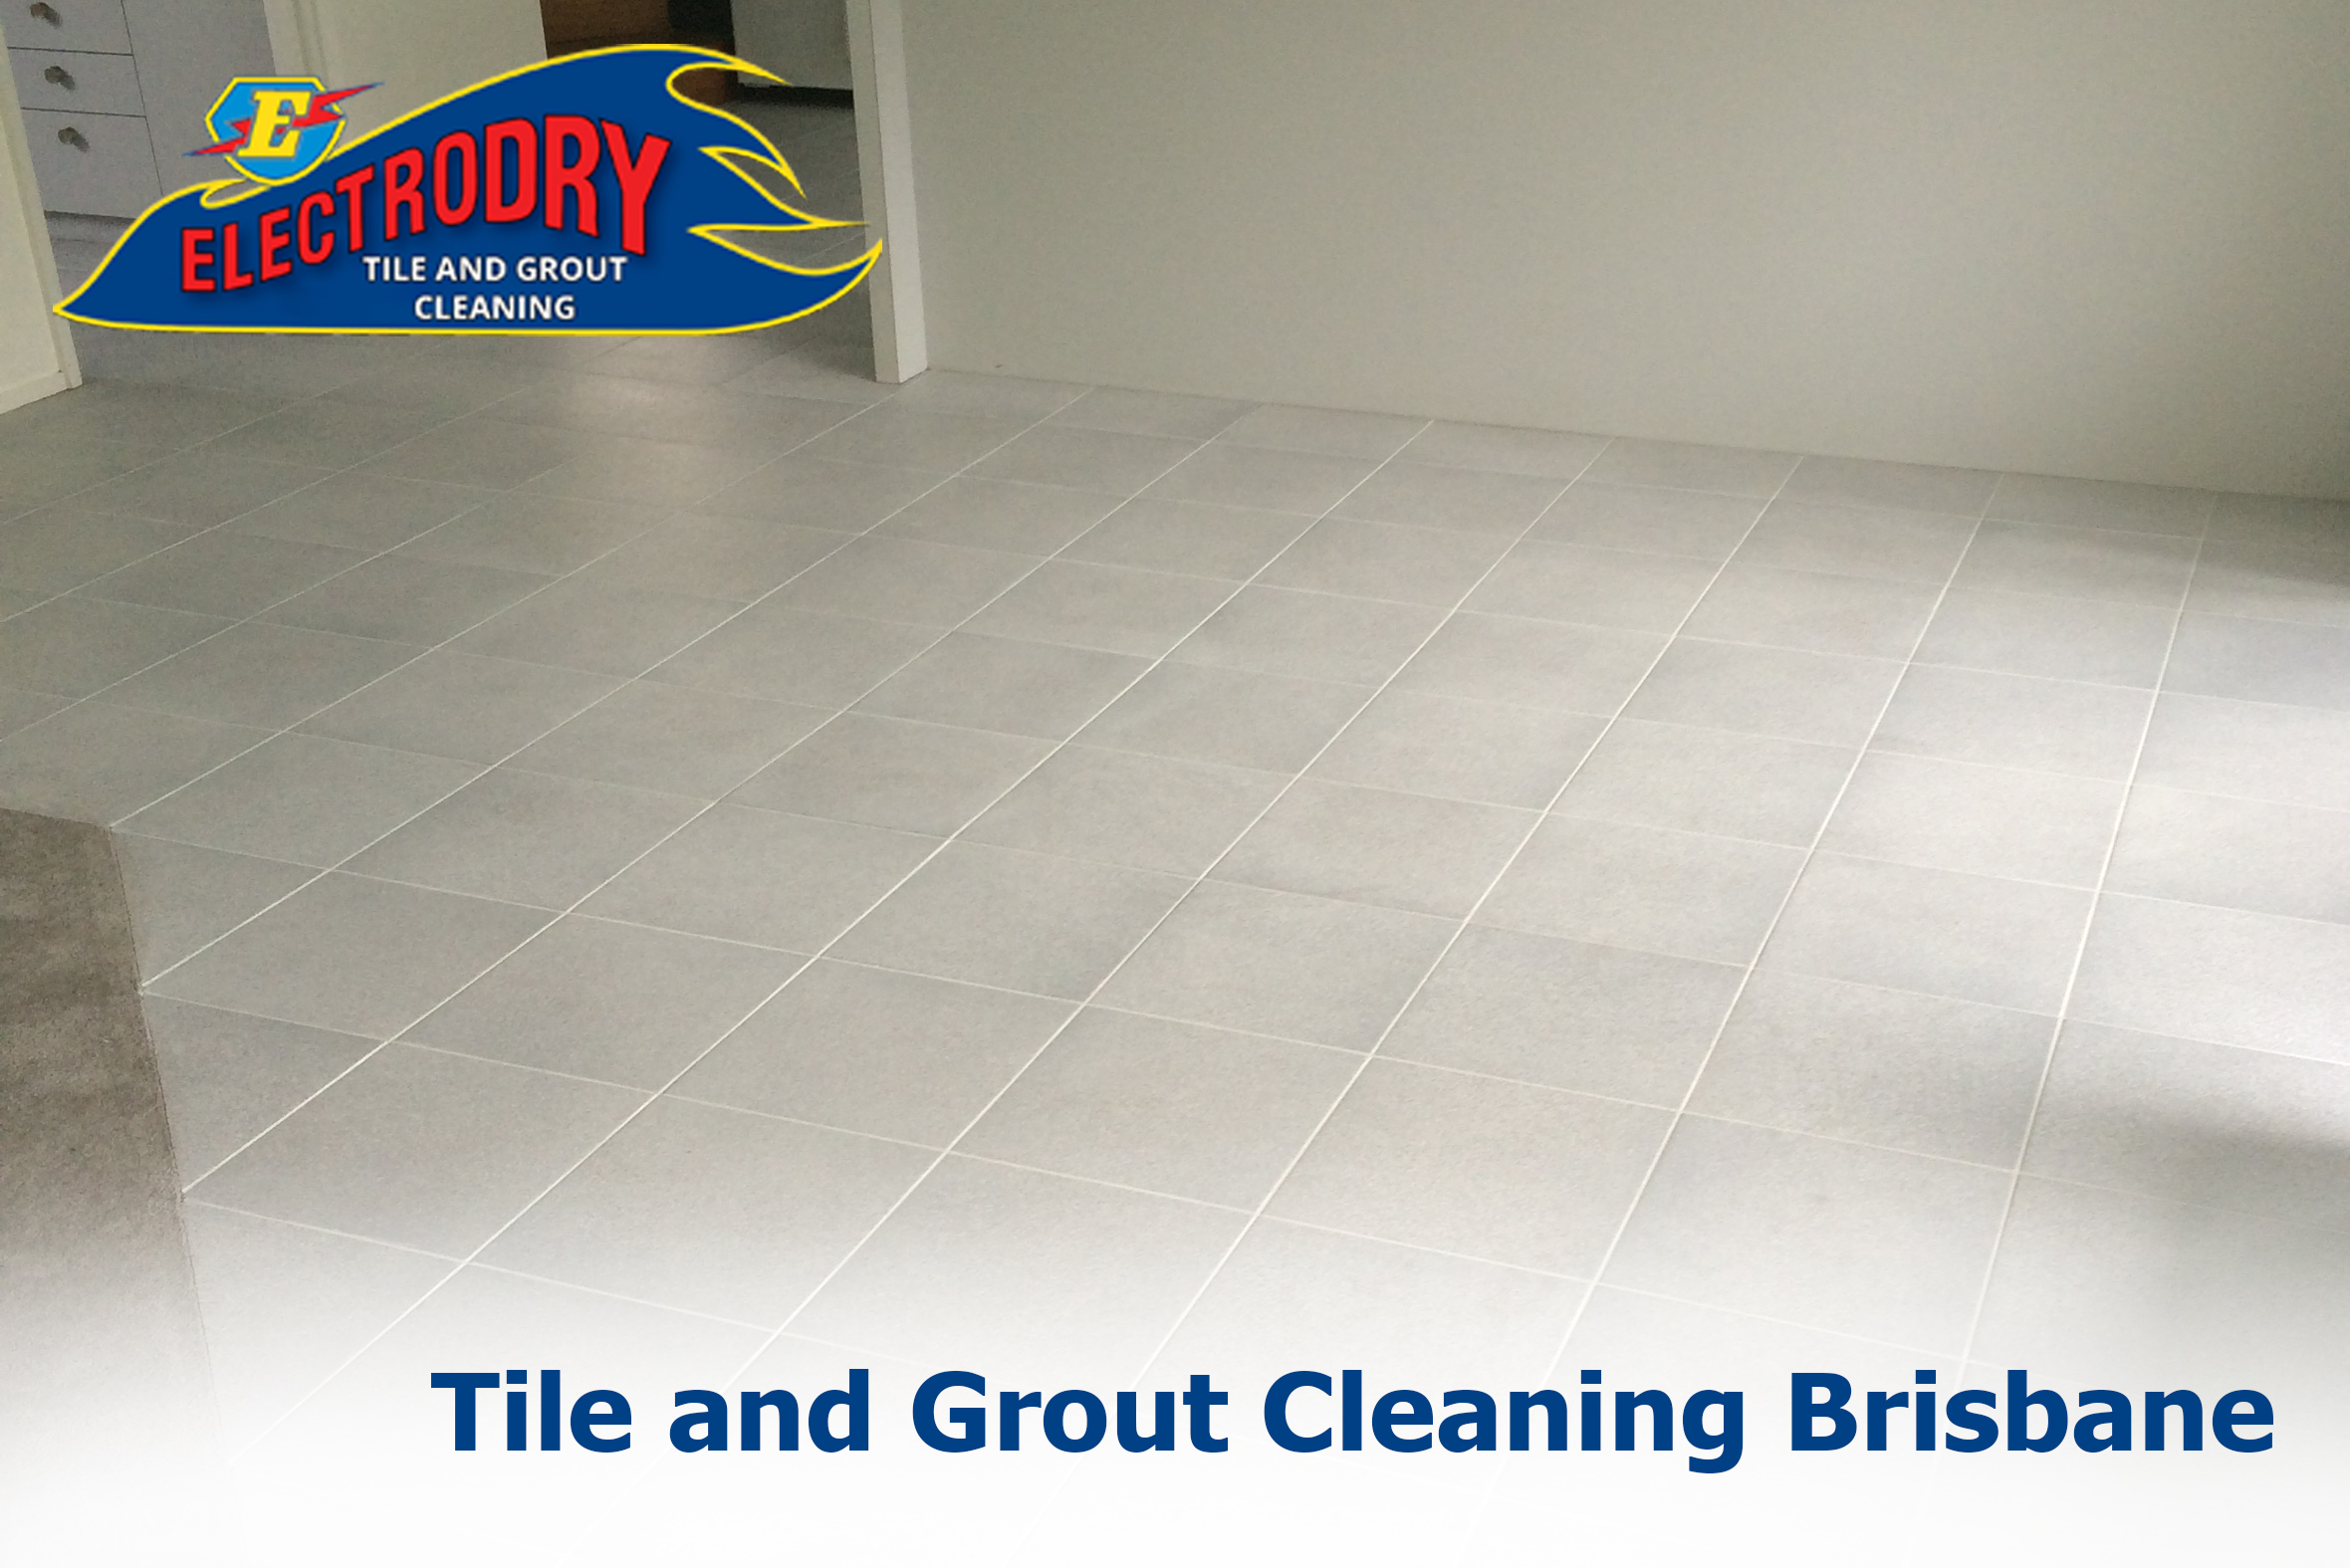 Brisbane tile and grout cleaning